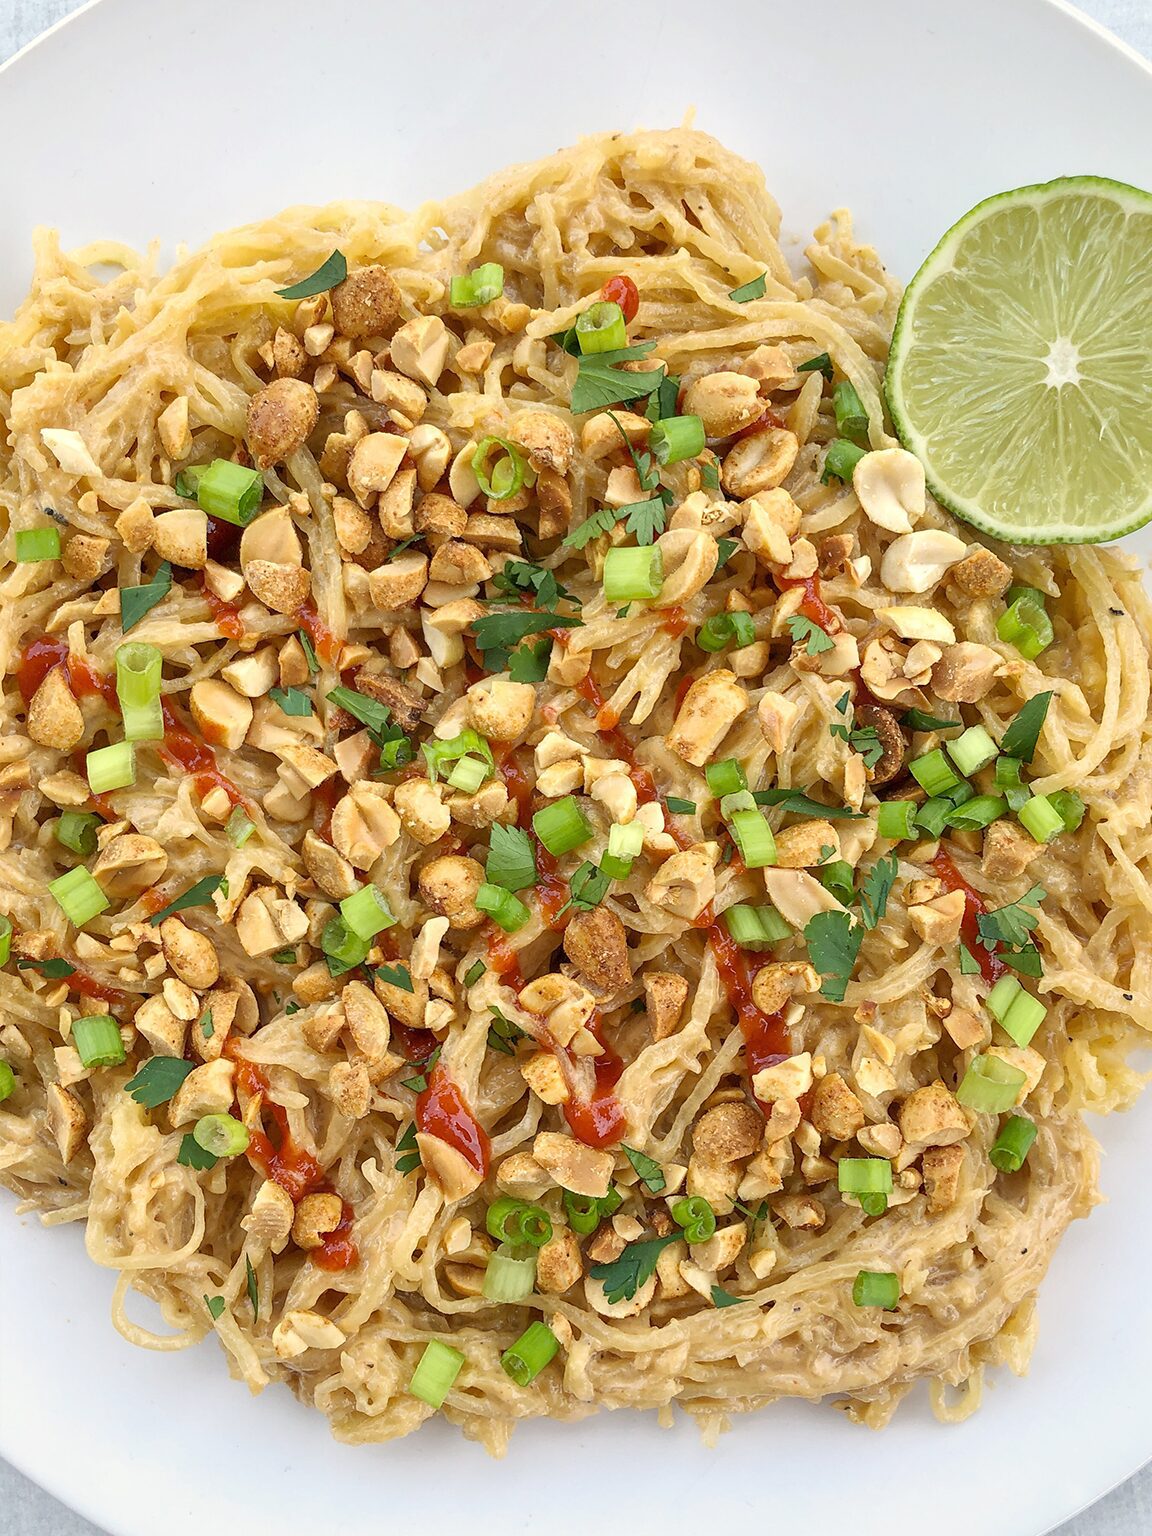 Spaghetti Squash with Peanut Sauce is vegan and gluten-free. Top with chopped peanuts, cilantro, and green onion for a pad thai inspired dish!